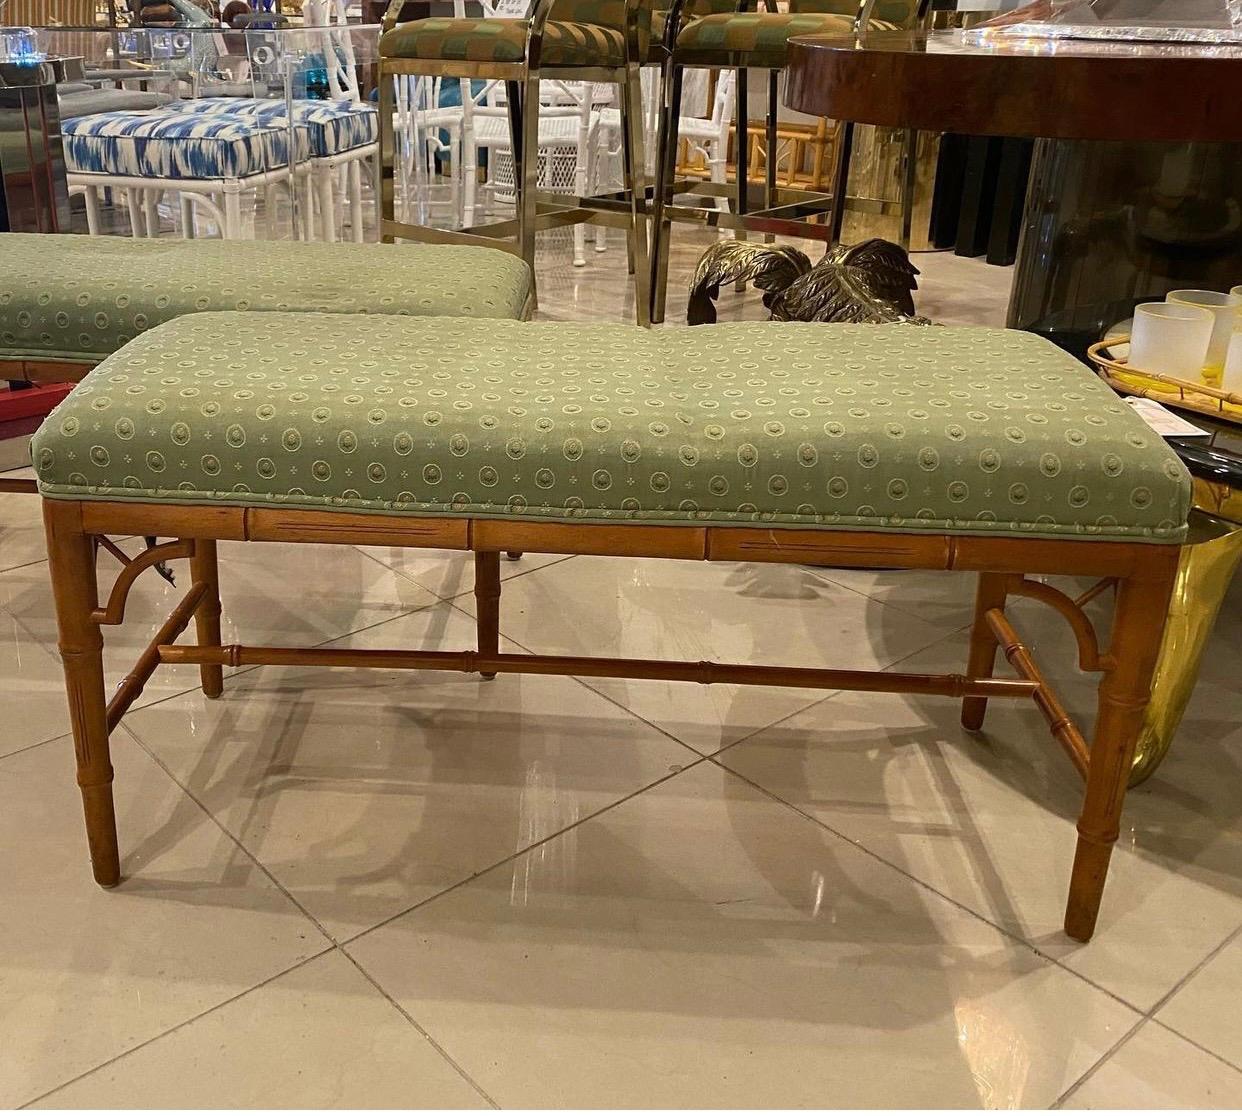 Pair of faux bamboo benches. Upholstery is original and will need to be recovered. May have stains or holes present. Wood finish is original. I have 200 of these so if you would like a single or more than a pair I can create a custom listing for